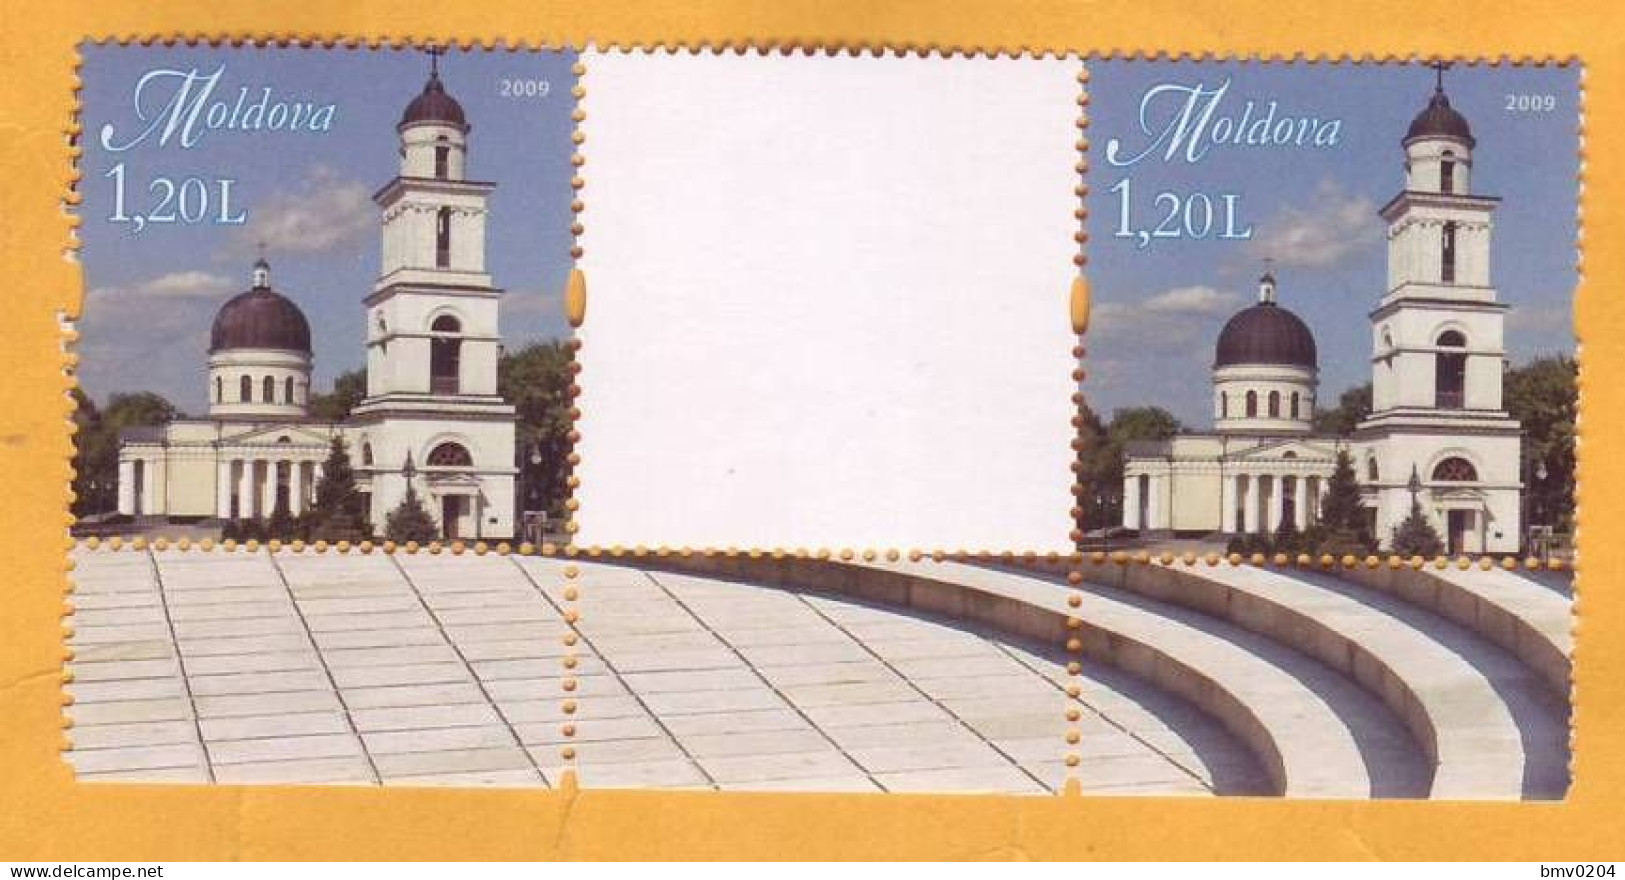 2009 2013 Moldova Personalized Postage Stamps, Issue 1.  SAMPLES.  Cathedral, Bell Tower, 2v Mint - Moldavië